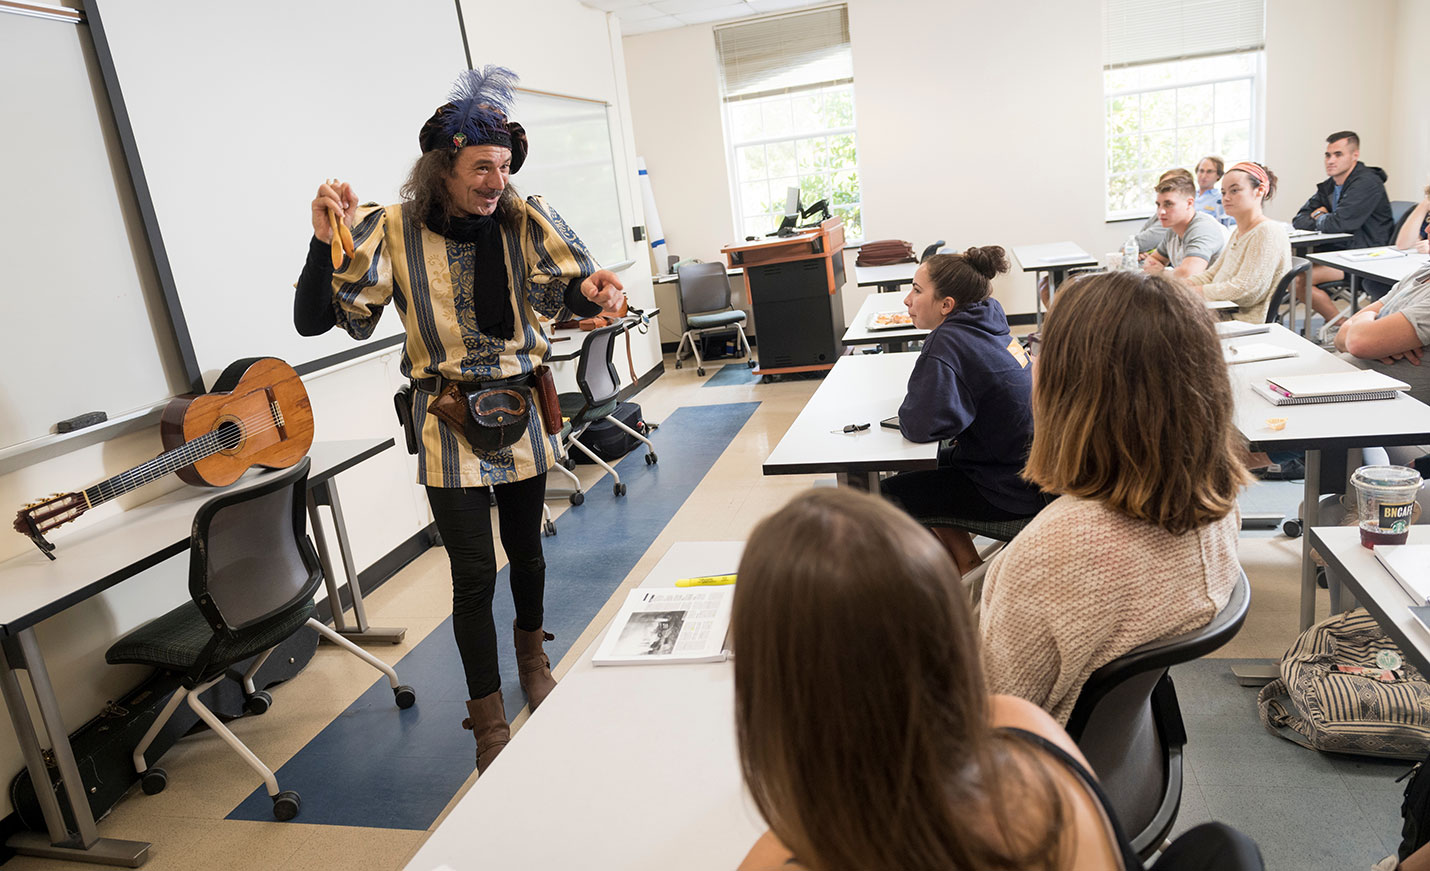 A professor dressed as Don Quixote performs for a class